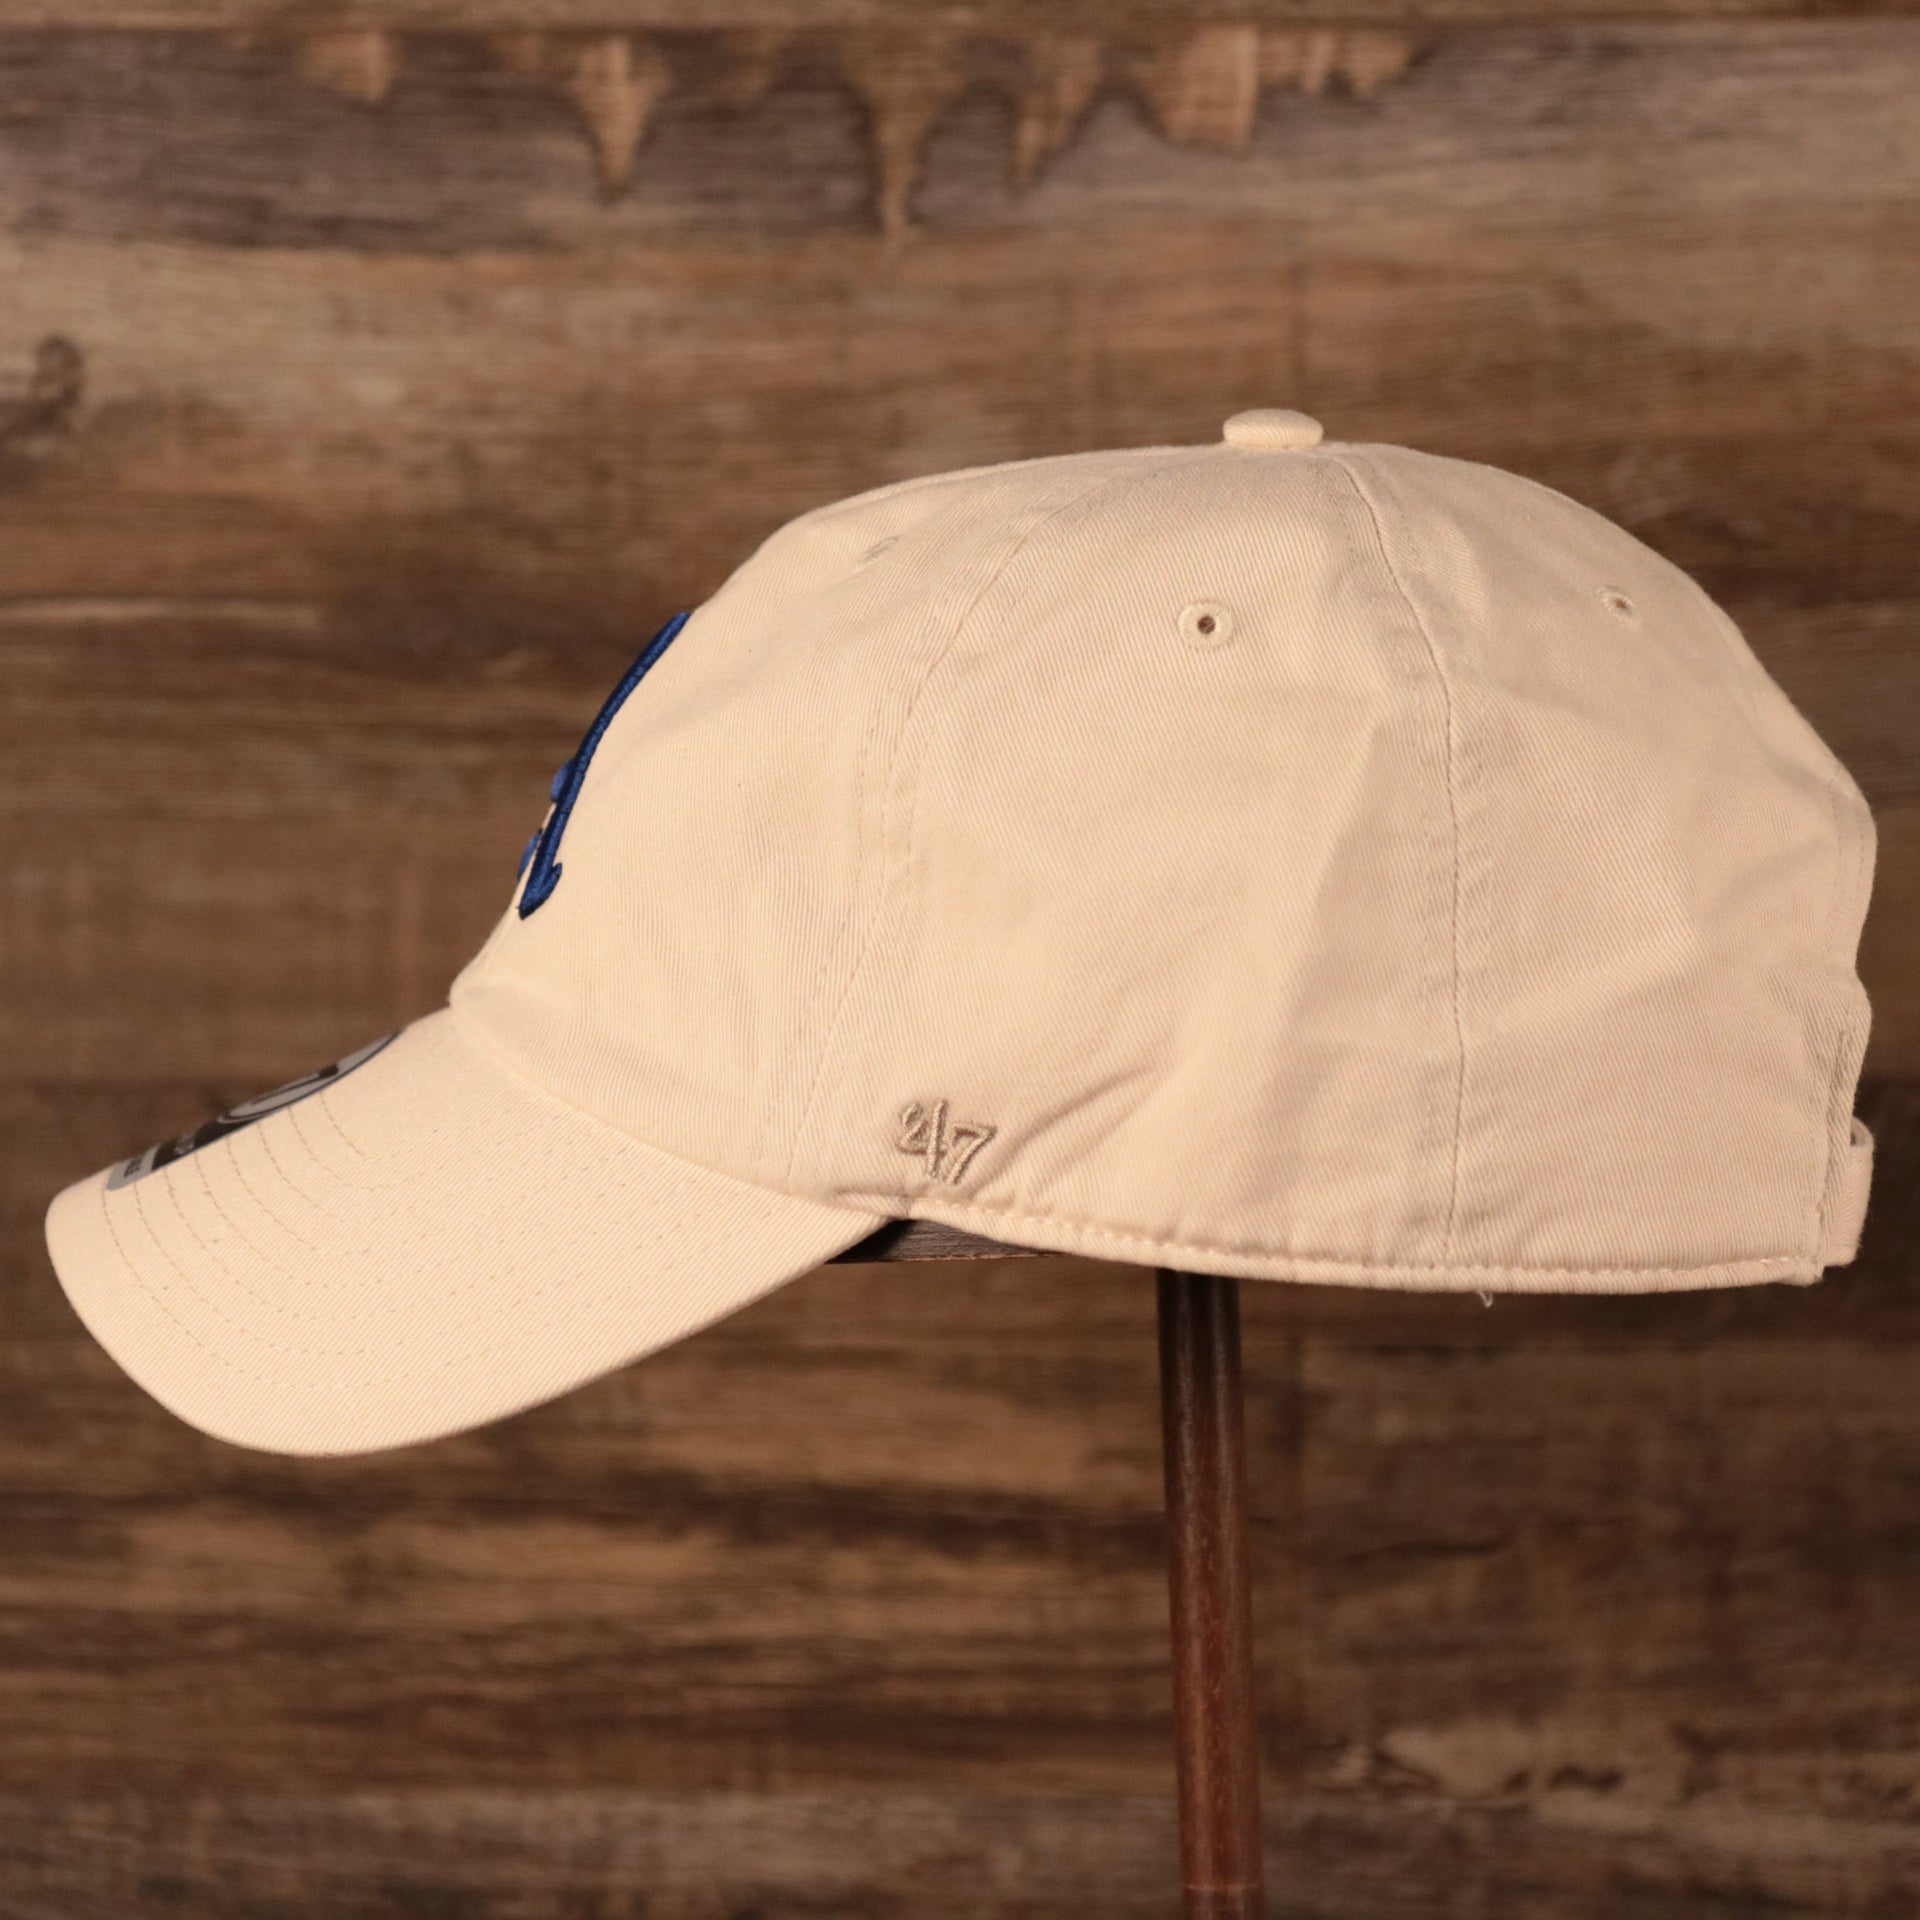 Philadelphia Athletics Royal Blue Logo Retro Cream Dad Hat Wearer's left side of the cap with '47 Clean Up side patch embroidered in tonal cream color